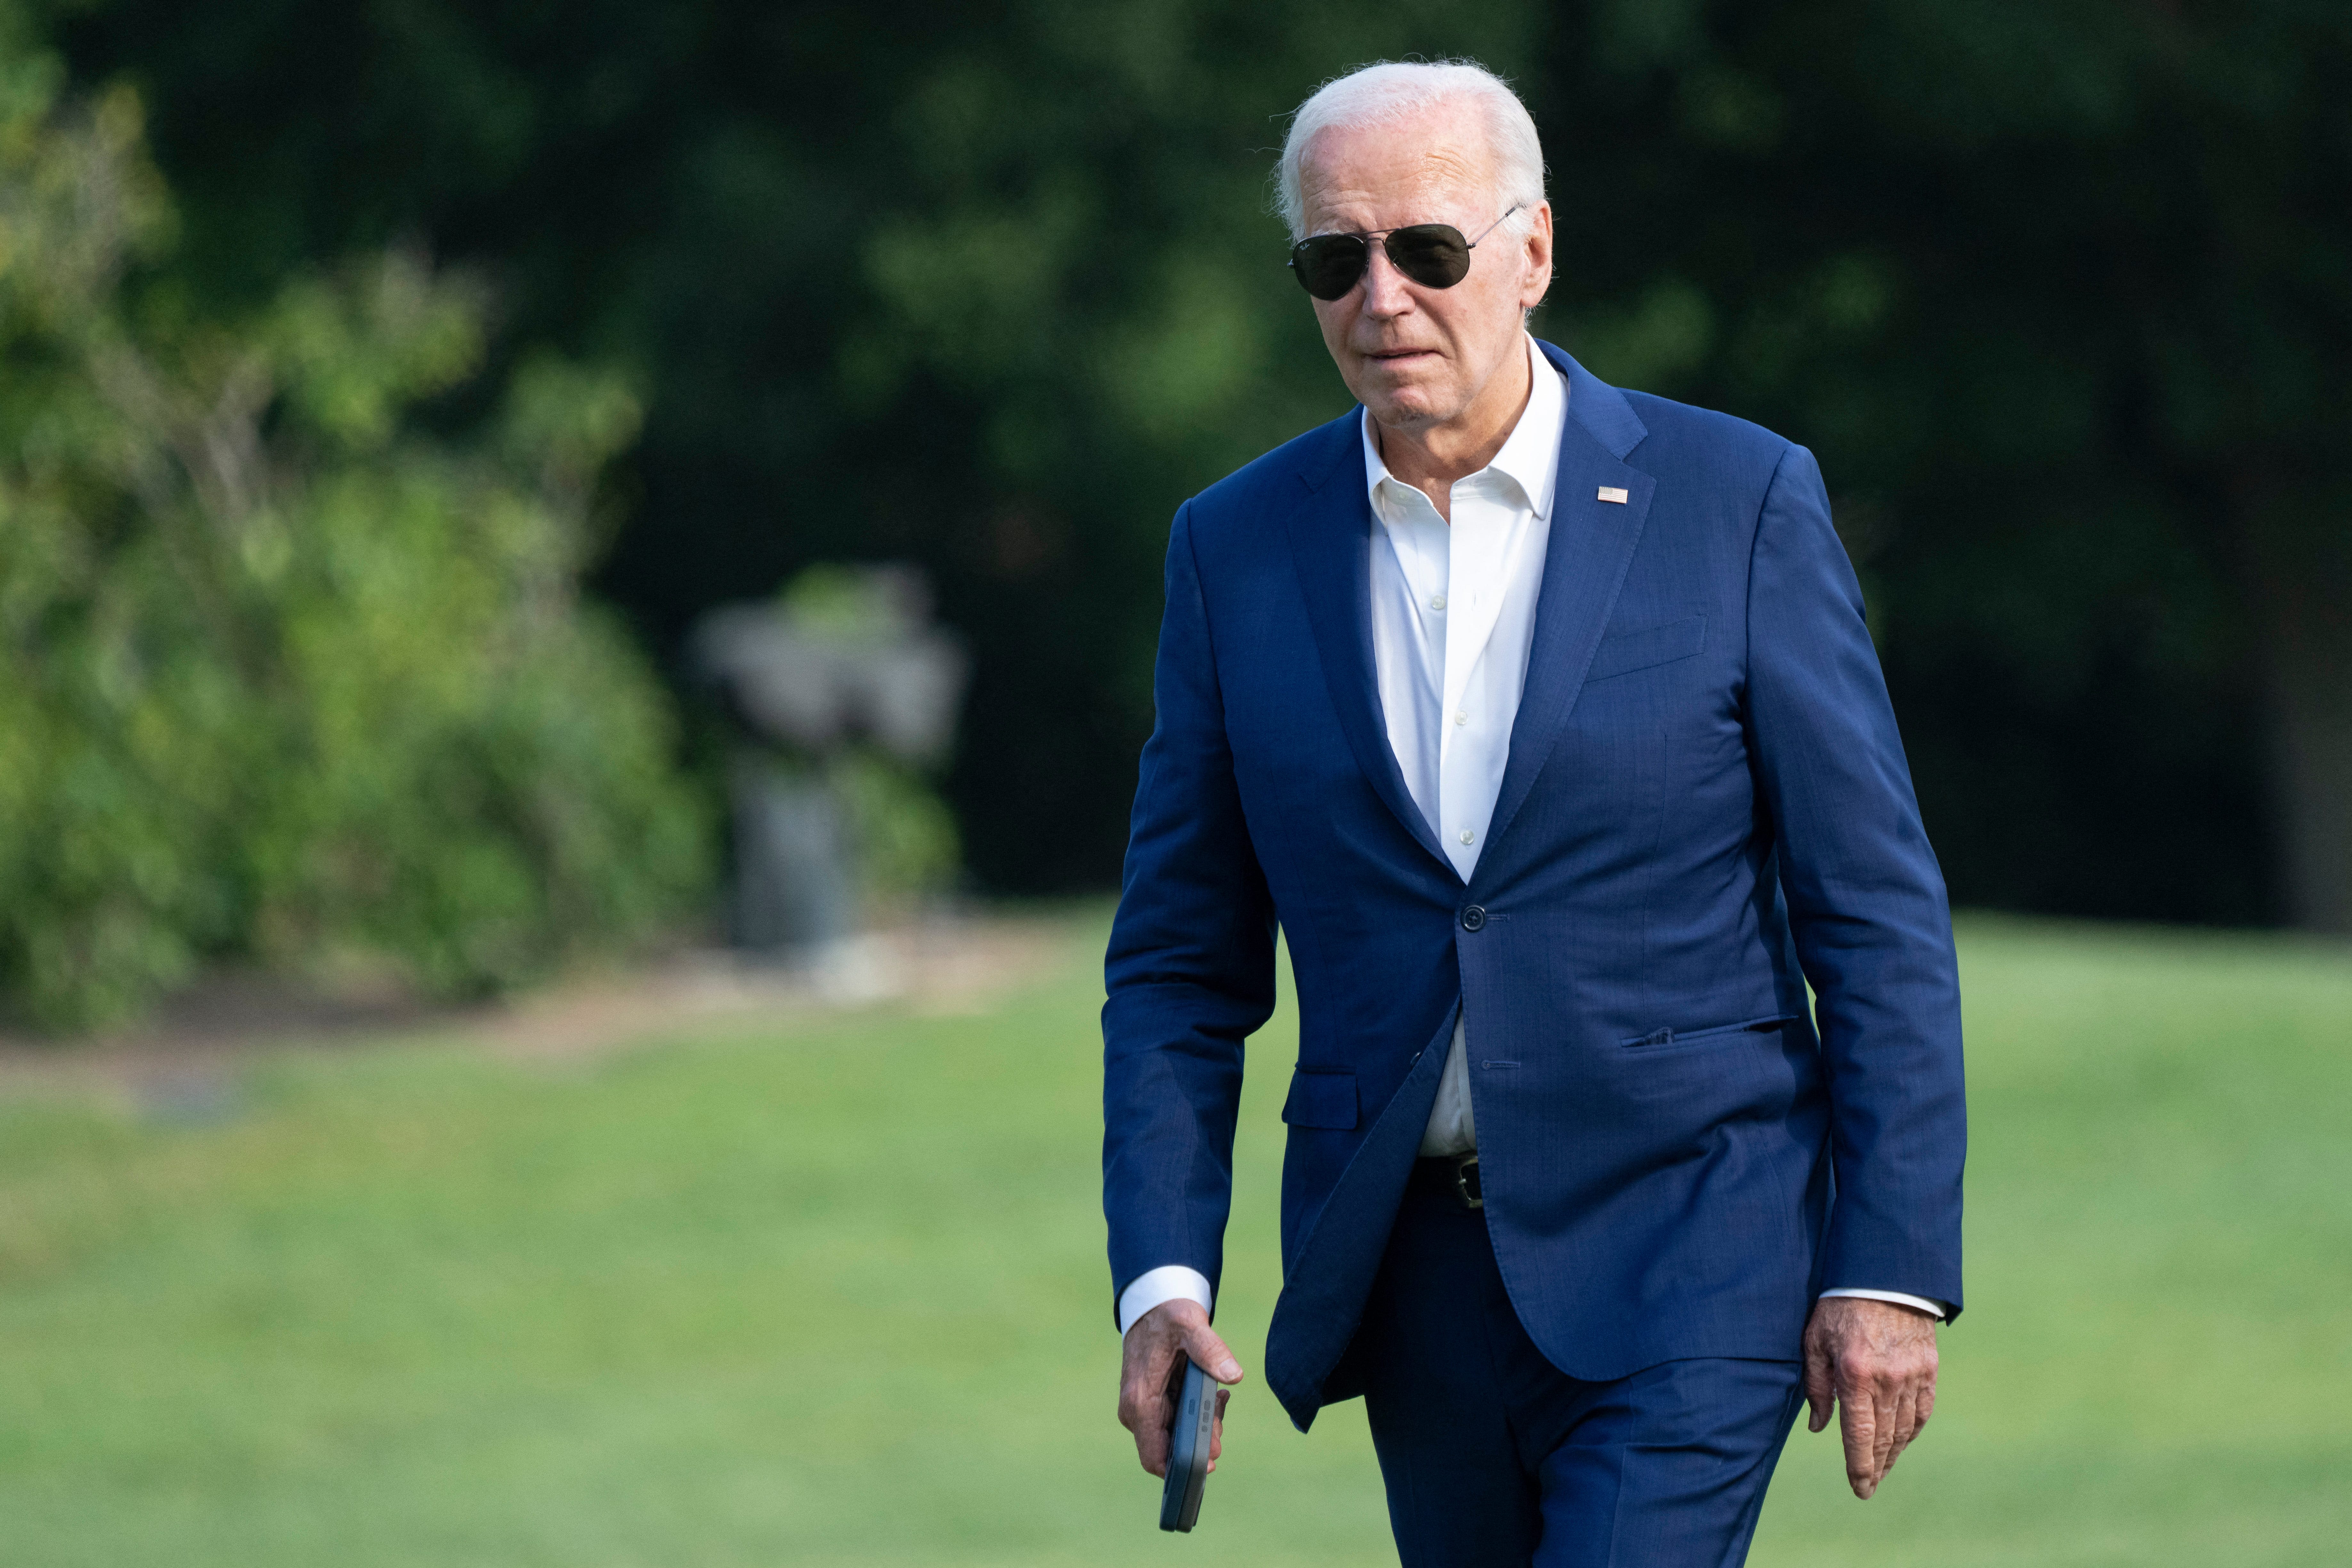 Biden can't beat Trump, but Democrats can still pick a better nominee. Here's how.